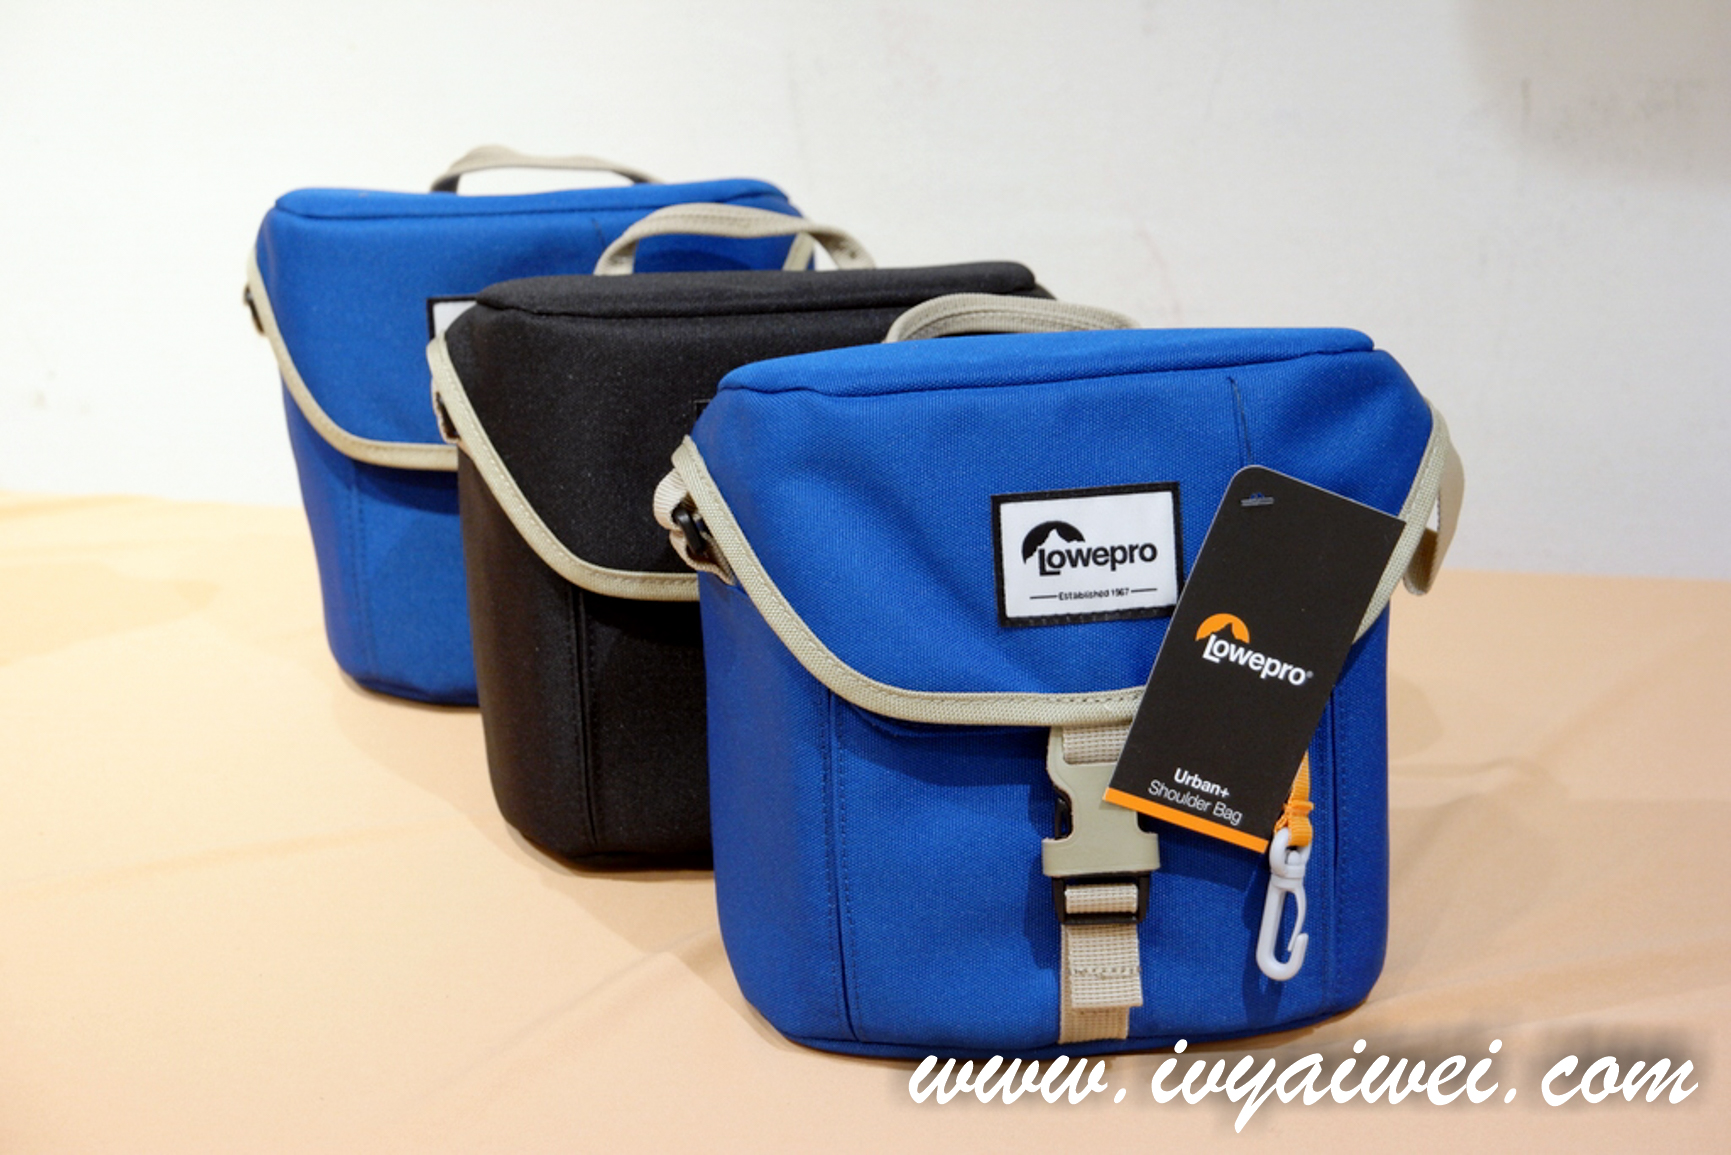 New Multifunctional Lifestyle Bags by Lowepro